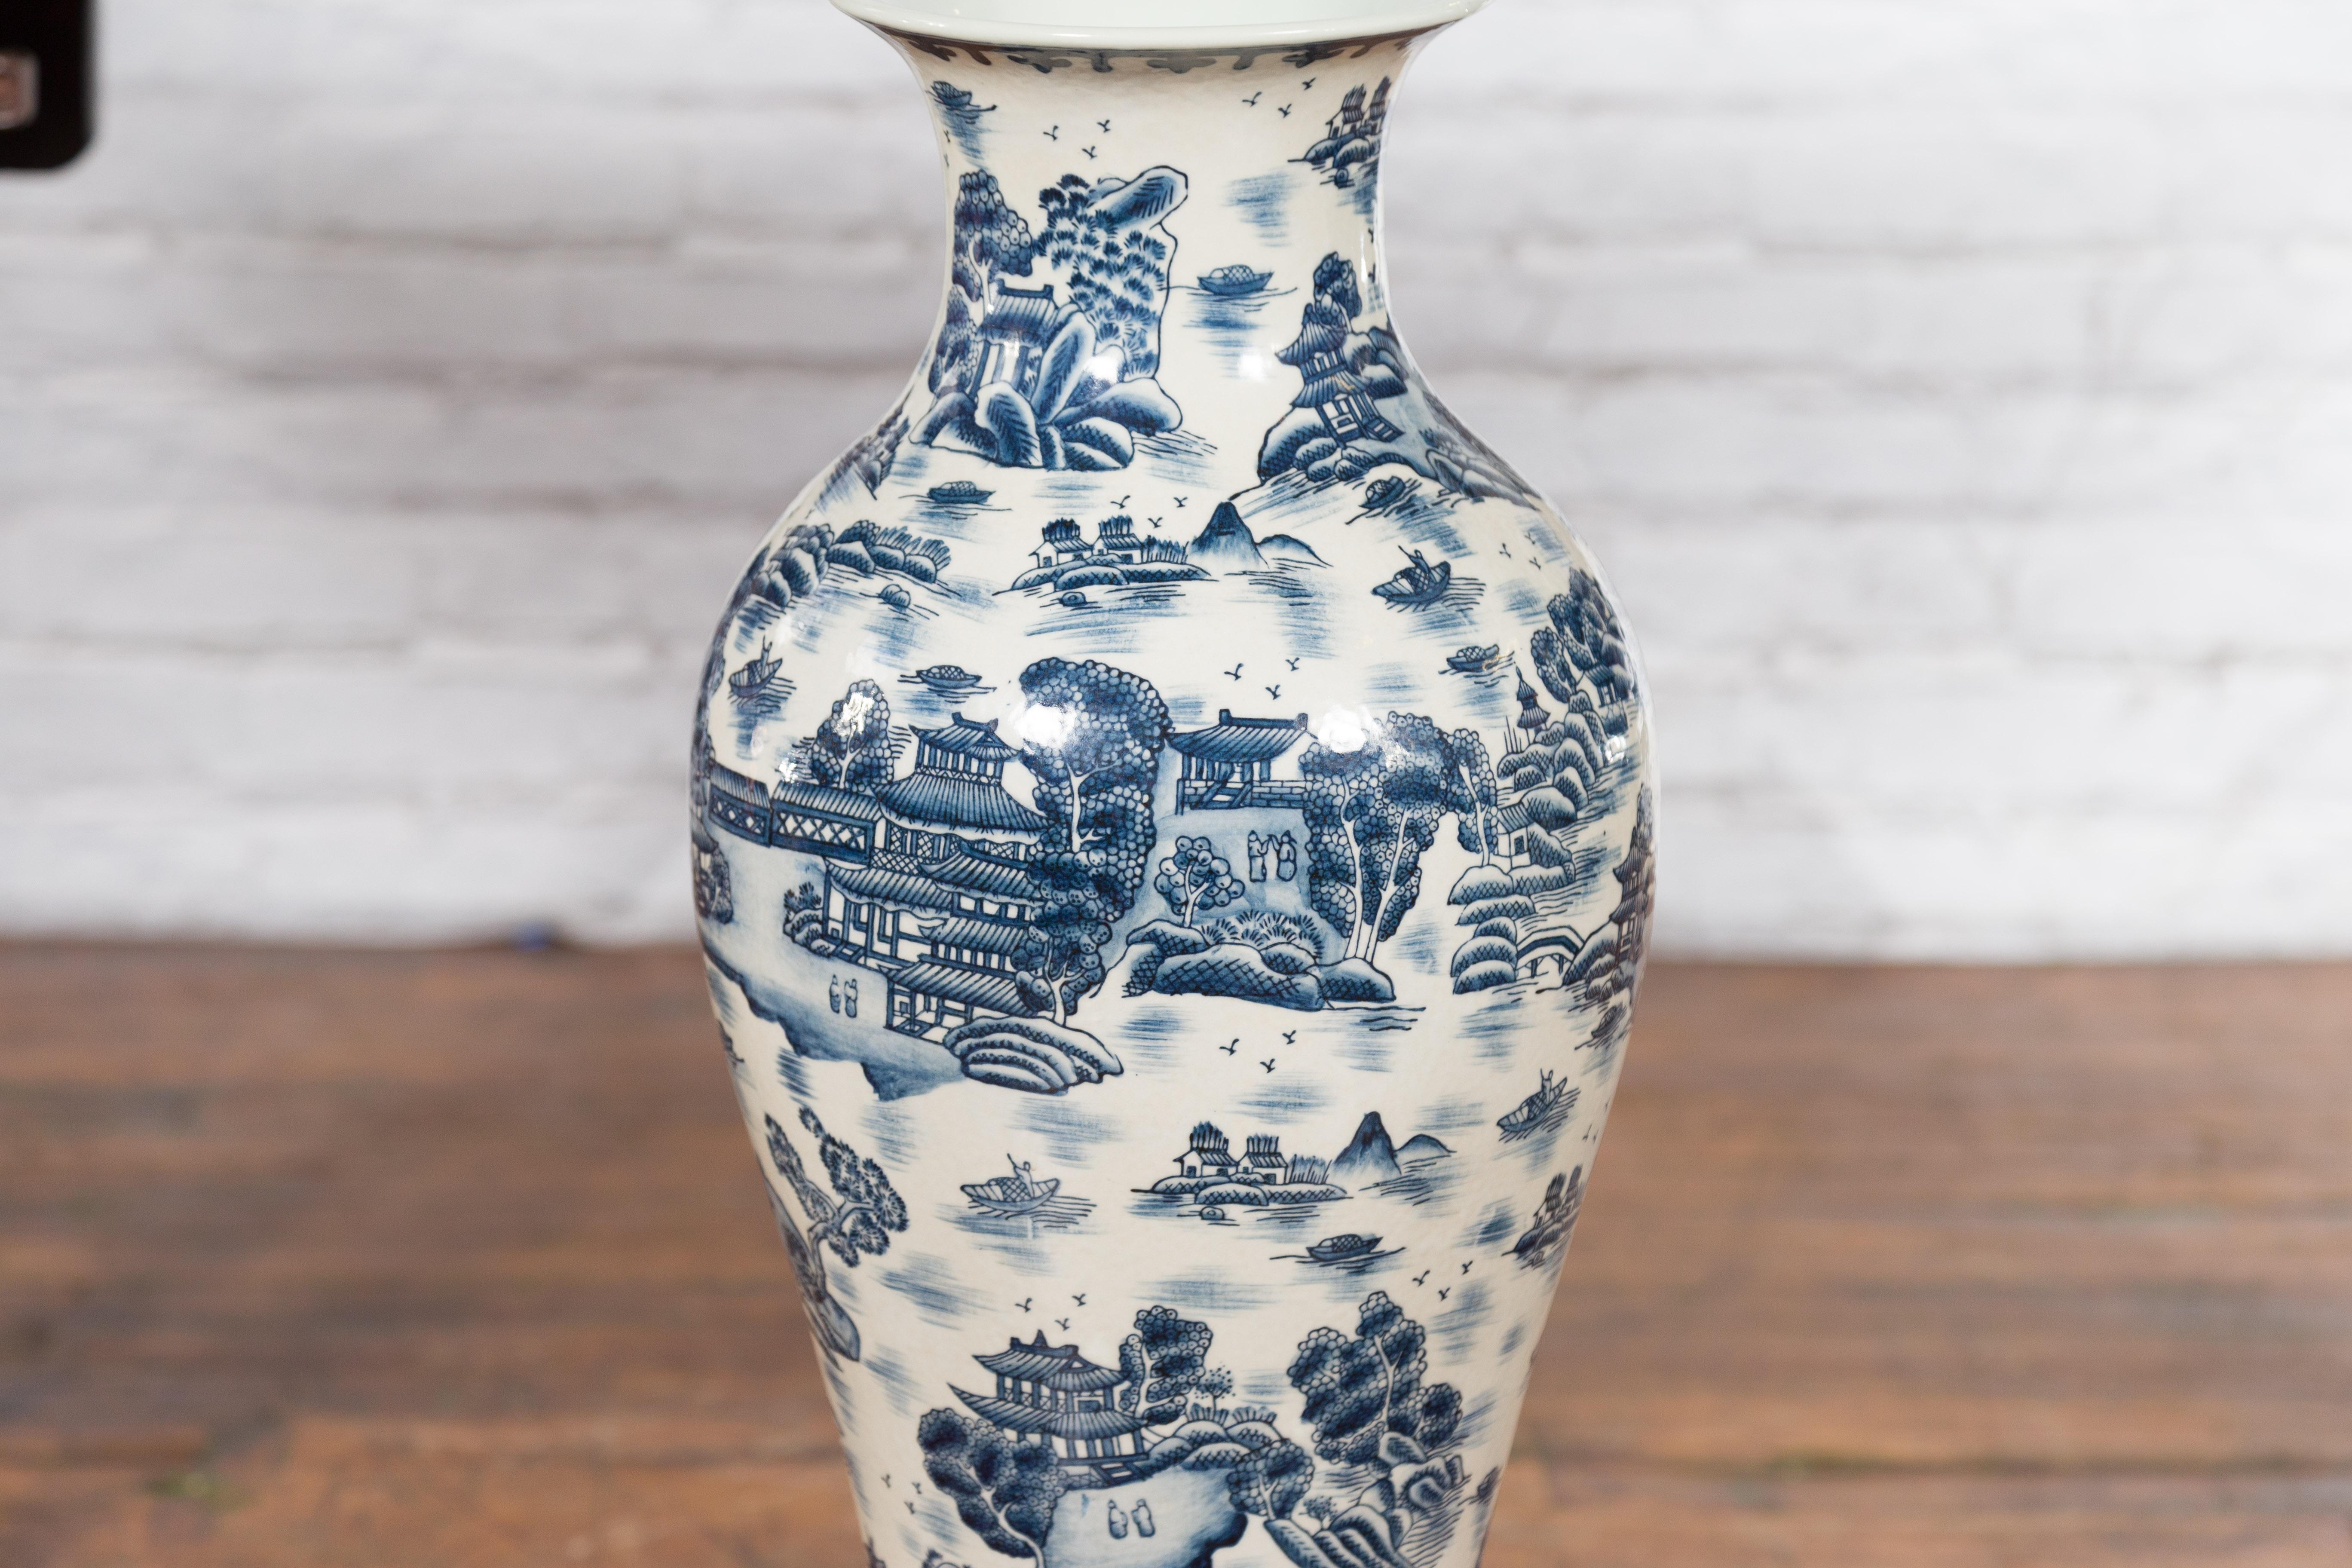 Chinese Vintage Blue and White Porcelain Vase with Landscapes and Architectures In Good Condition For Sale In Yonkers, NY